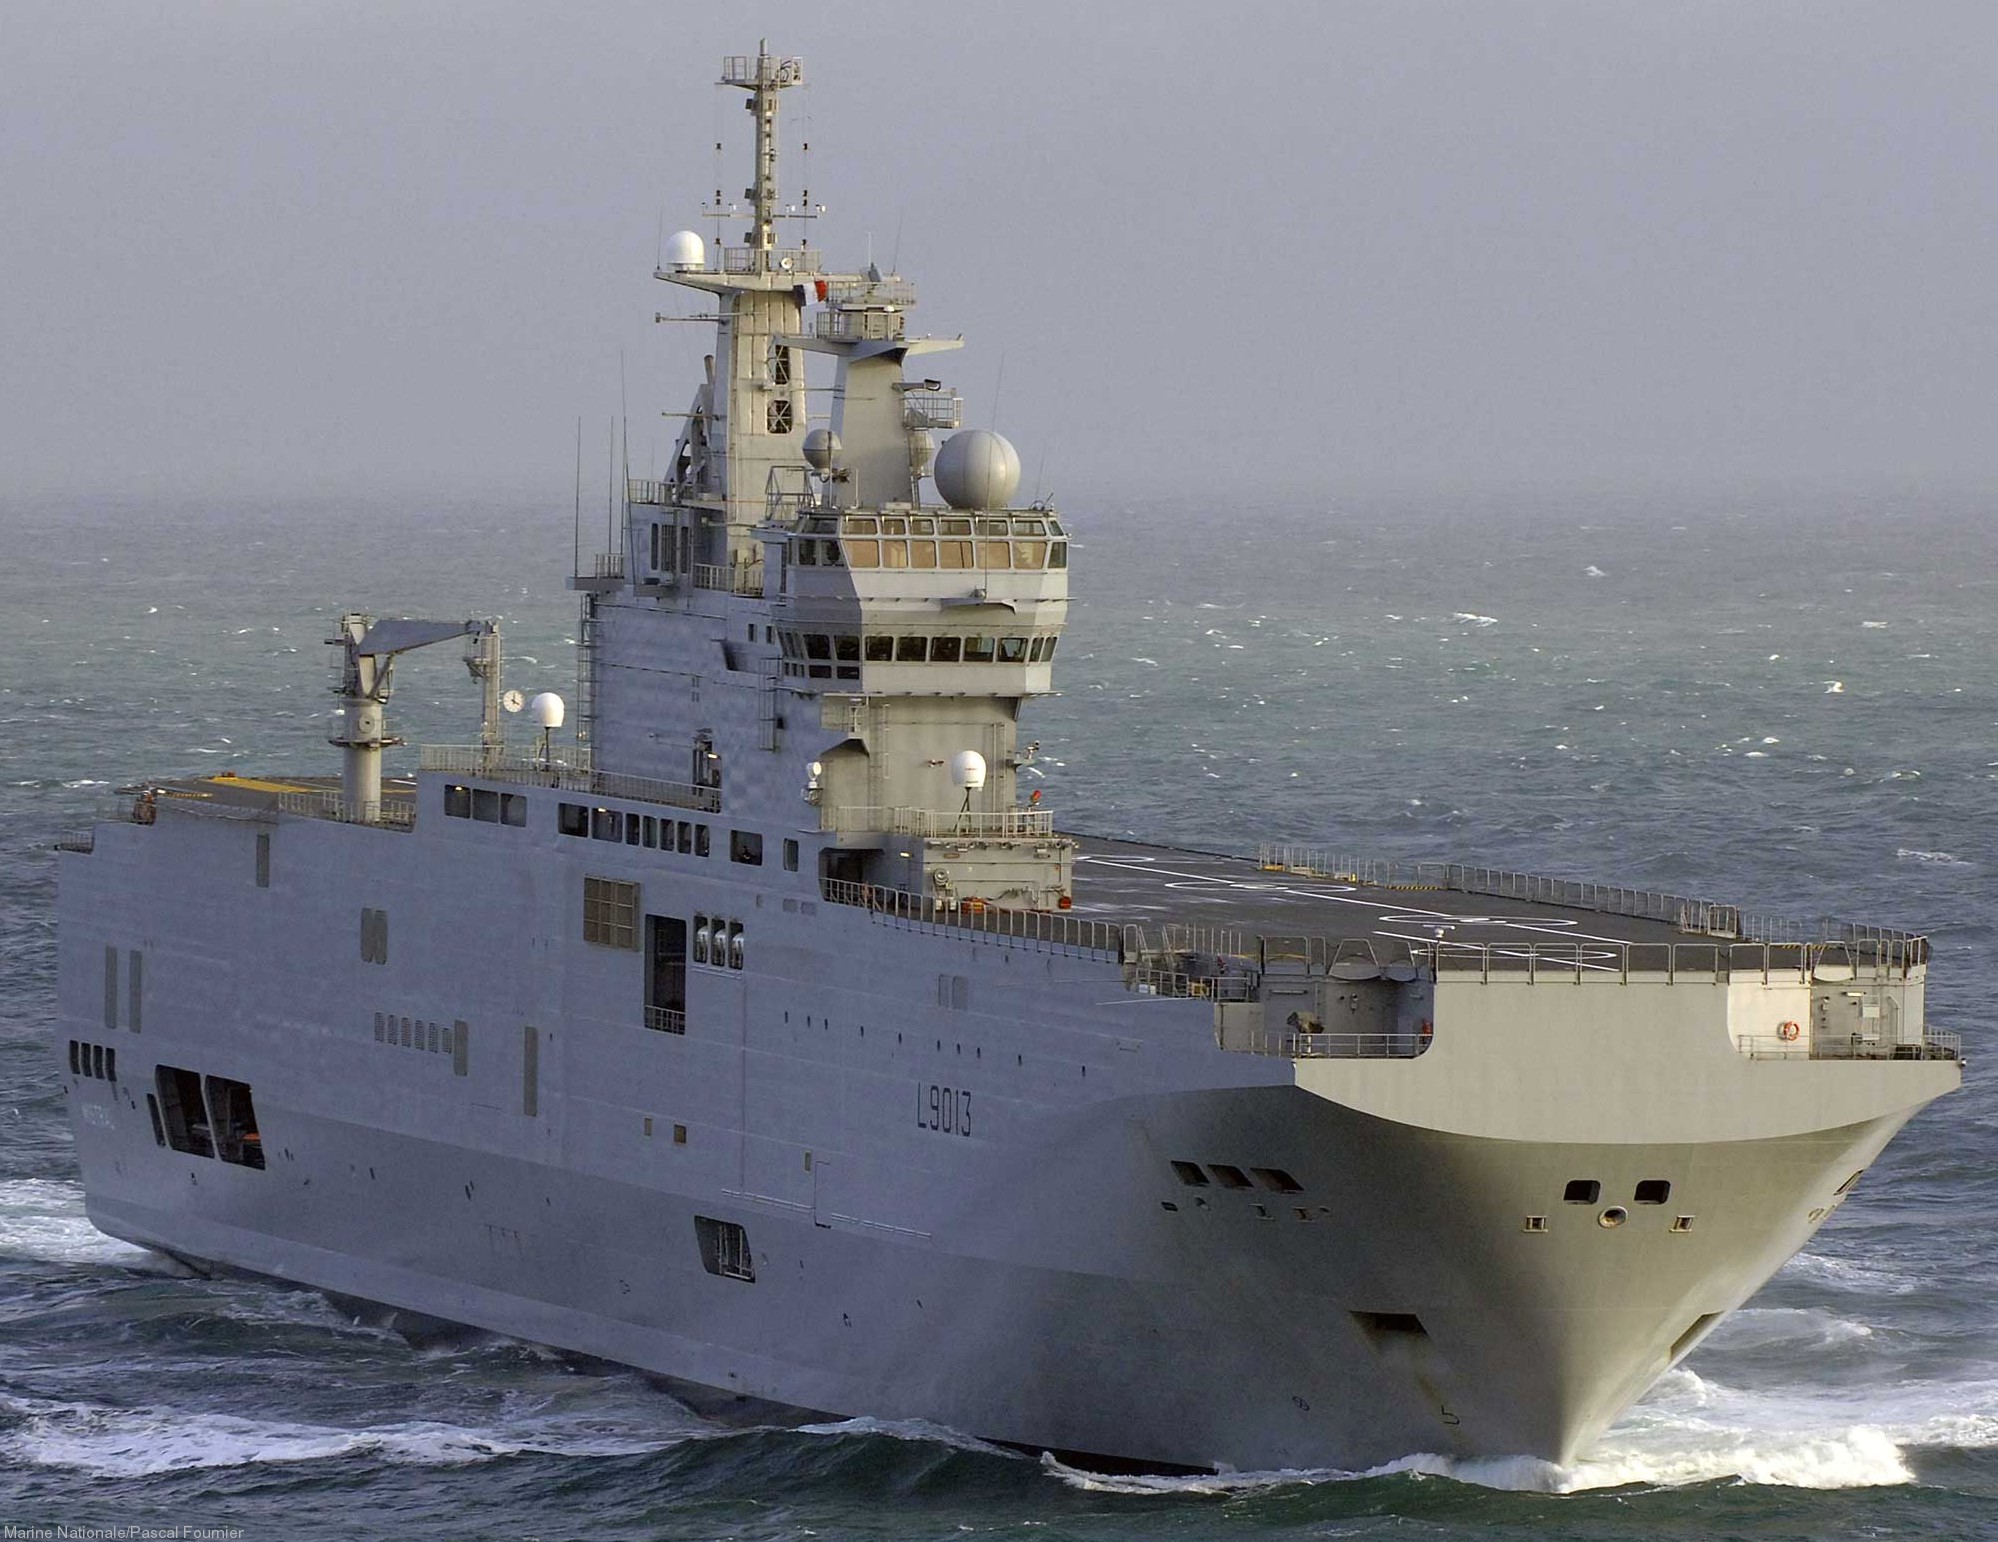 l-9013 fs mistral amphibious assault command ship french navy marine nationale 18